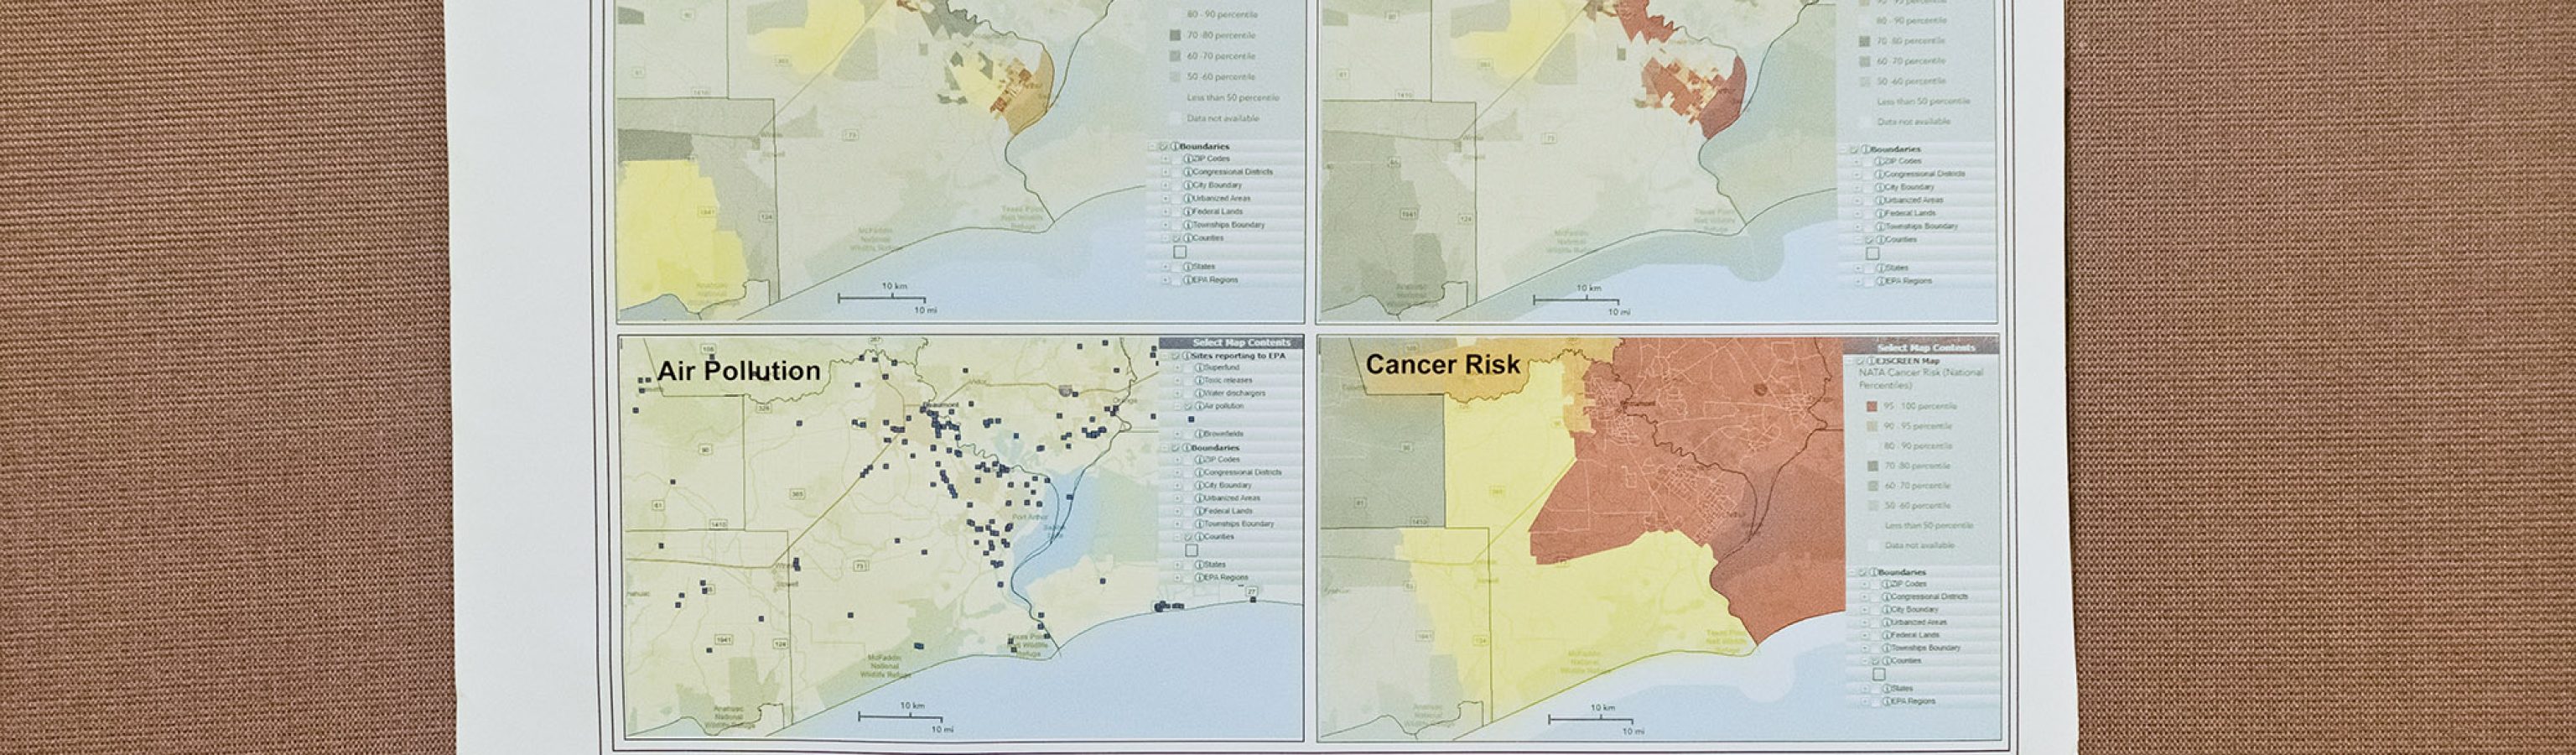 An environmental map from Texas Southern University shows pollution risks in Jefferson County, Texas and hangs on display during CEER’s People’s Hearing event April 30, 2022 in Houston, Texas.